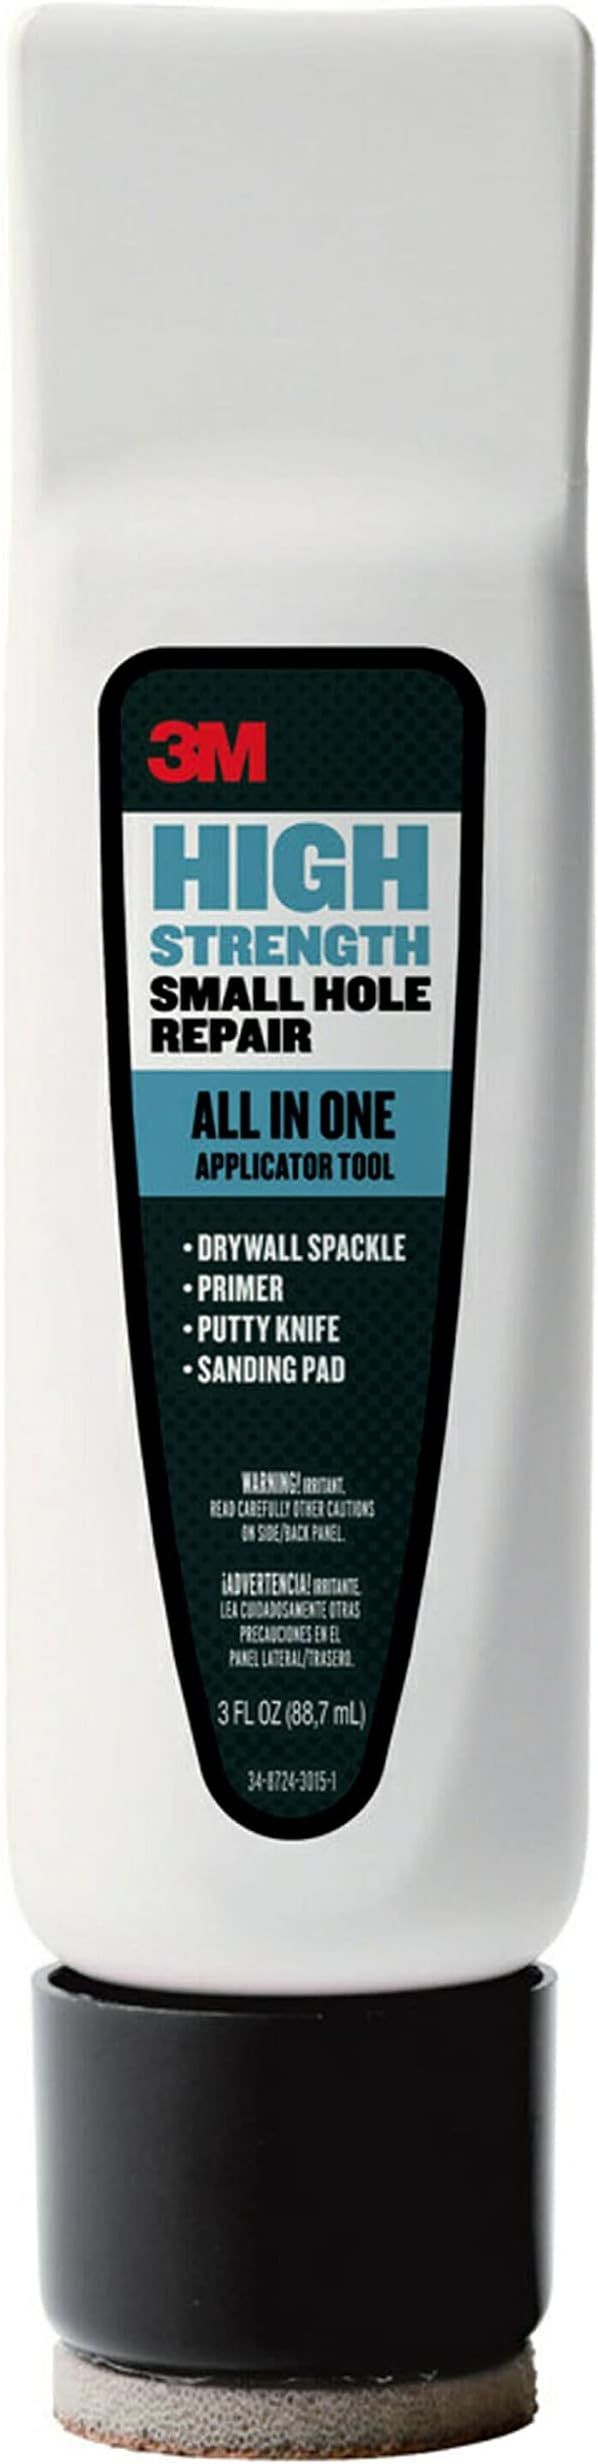 3M High Strength Small Hole Repair, All in One Applicator Tool, Quick and Easy Wall Repair | Amazon (US)